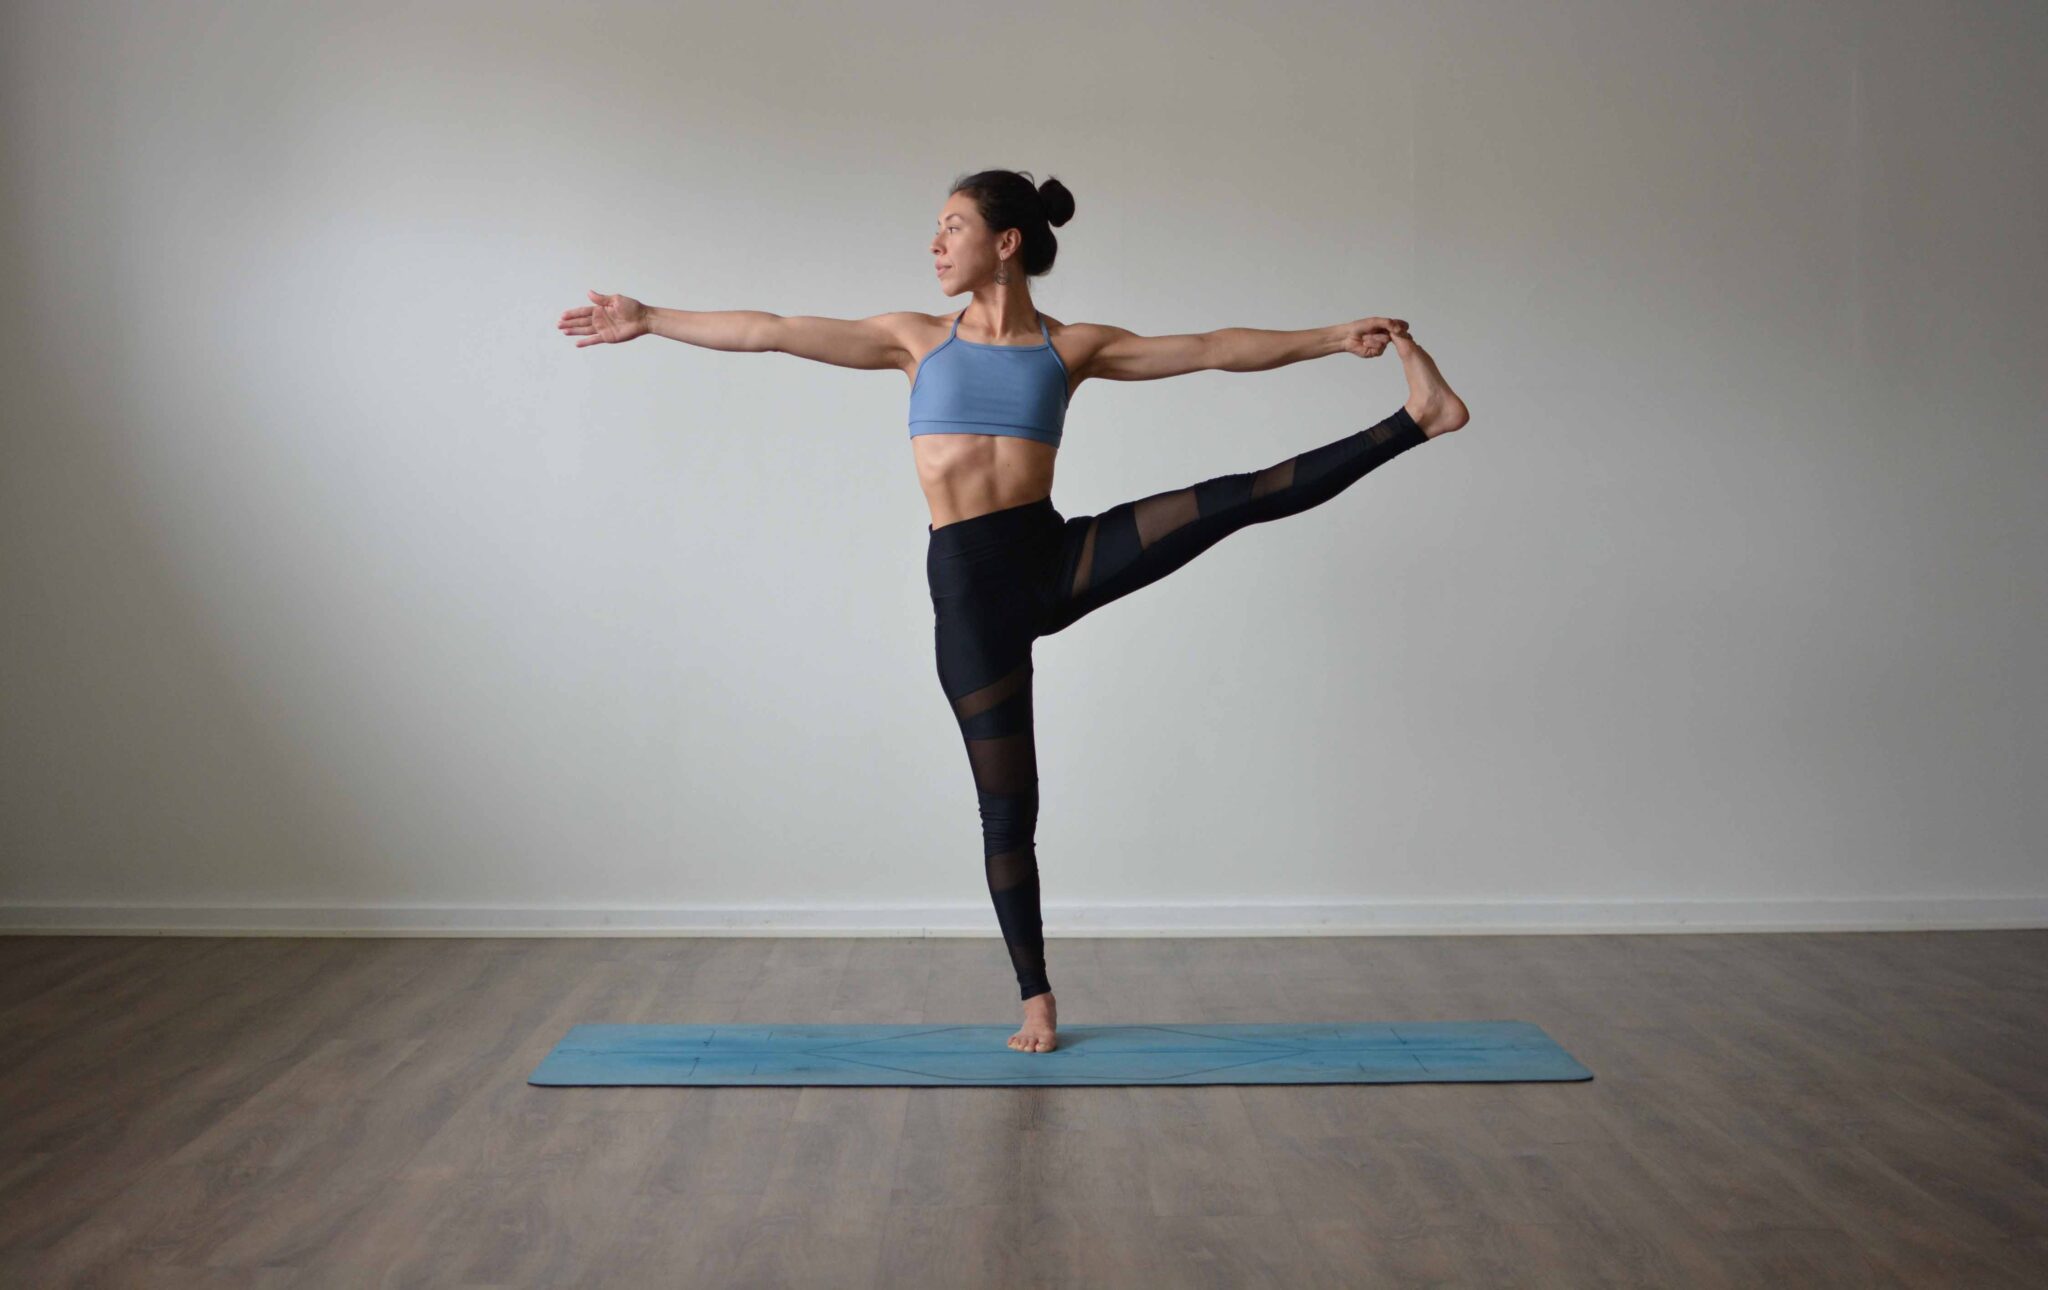 Yoga Poses to Reduce Head-to-Toe Body Tension | POPSUGAR Fitness